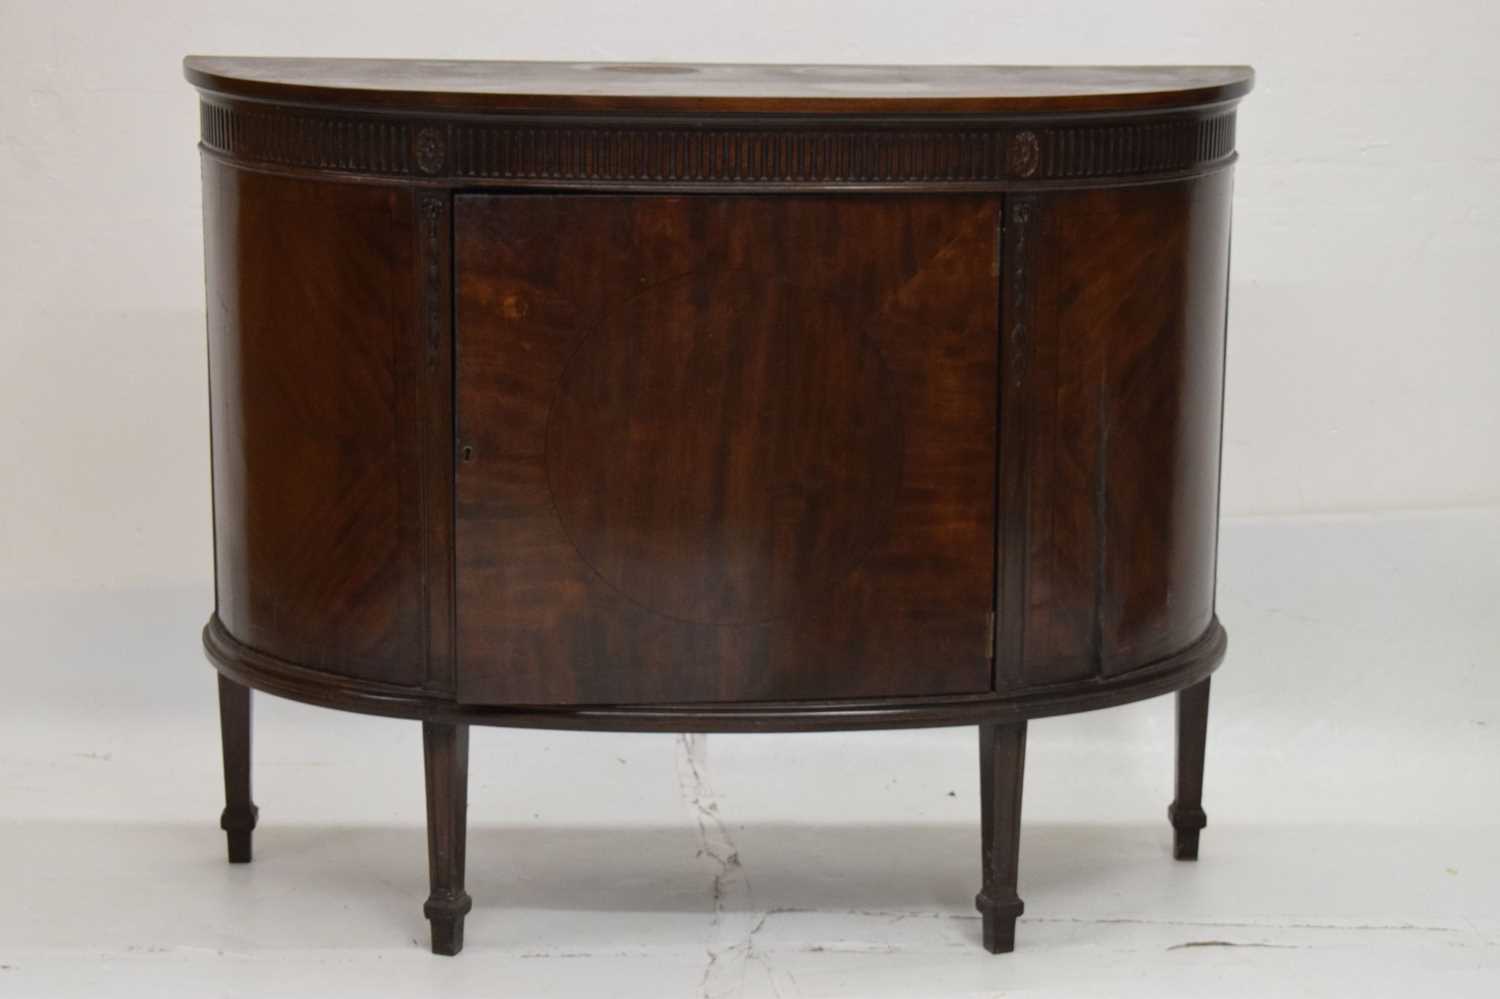 Pair of 1920s inlaid mahogany demi-lune side cabinets in the Adam Revival taste - Image 9 of 15